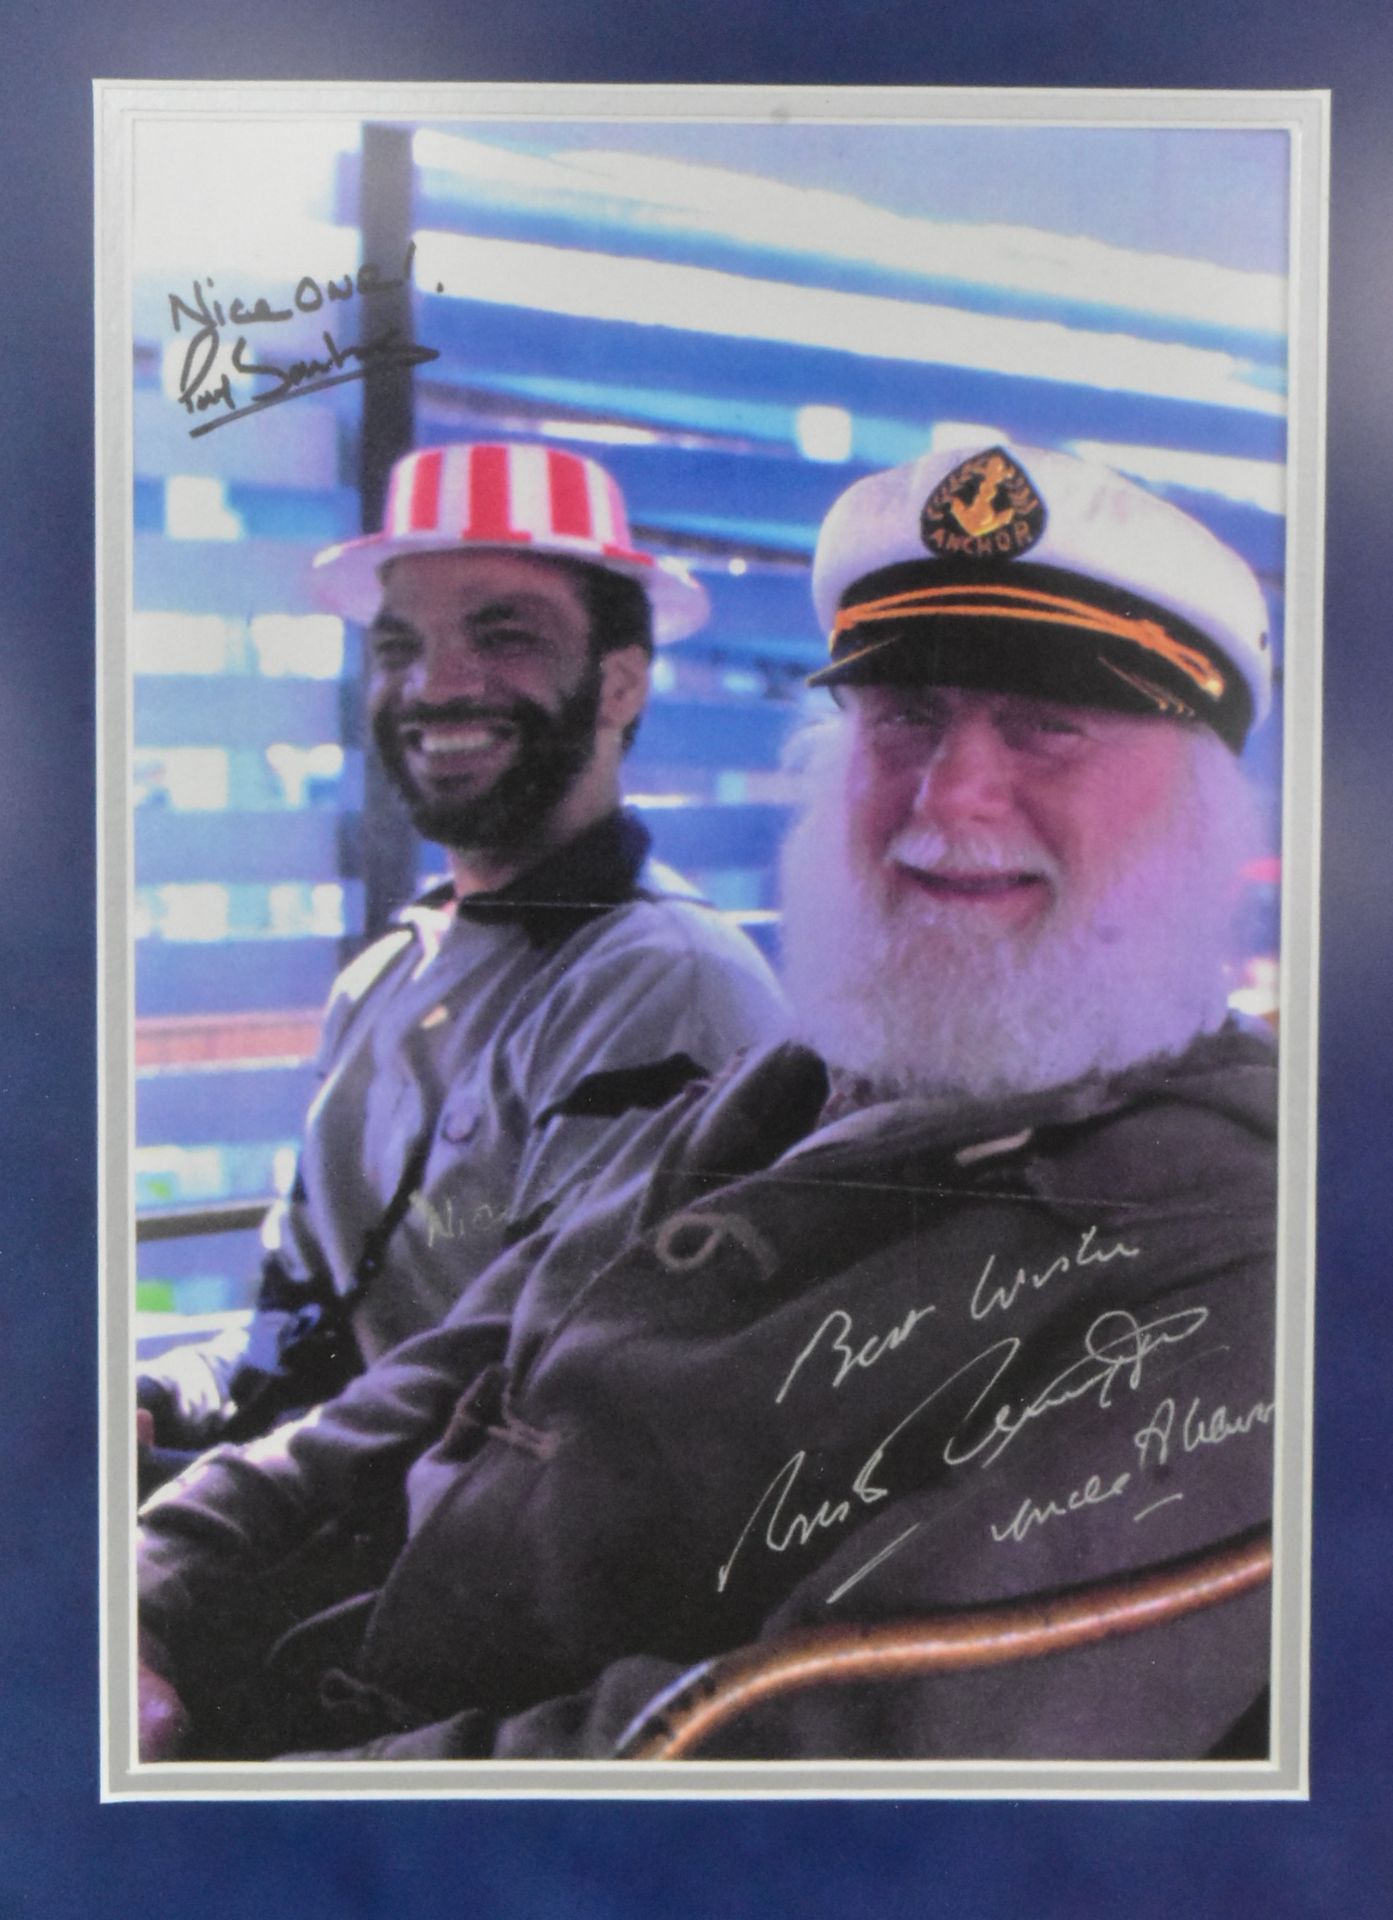 ONLY FOOLS & HORSES - THE JOLLY BOYS' OUTING - WHOLE CAST AUTOGRAPHS - Image 2 of 4